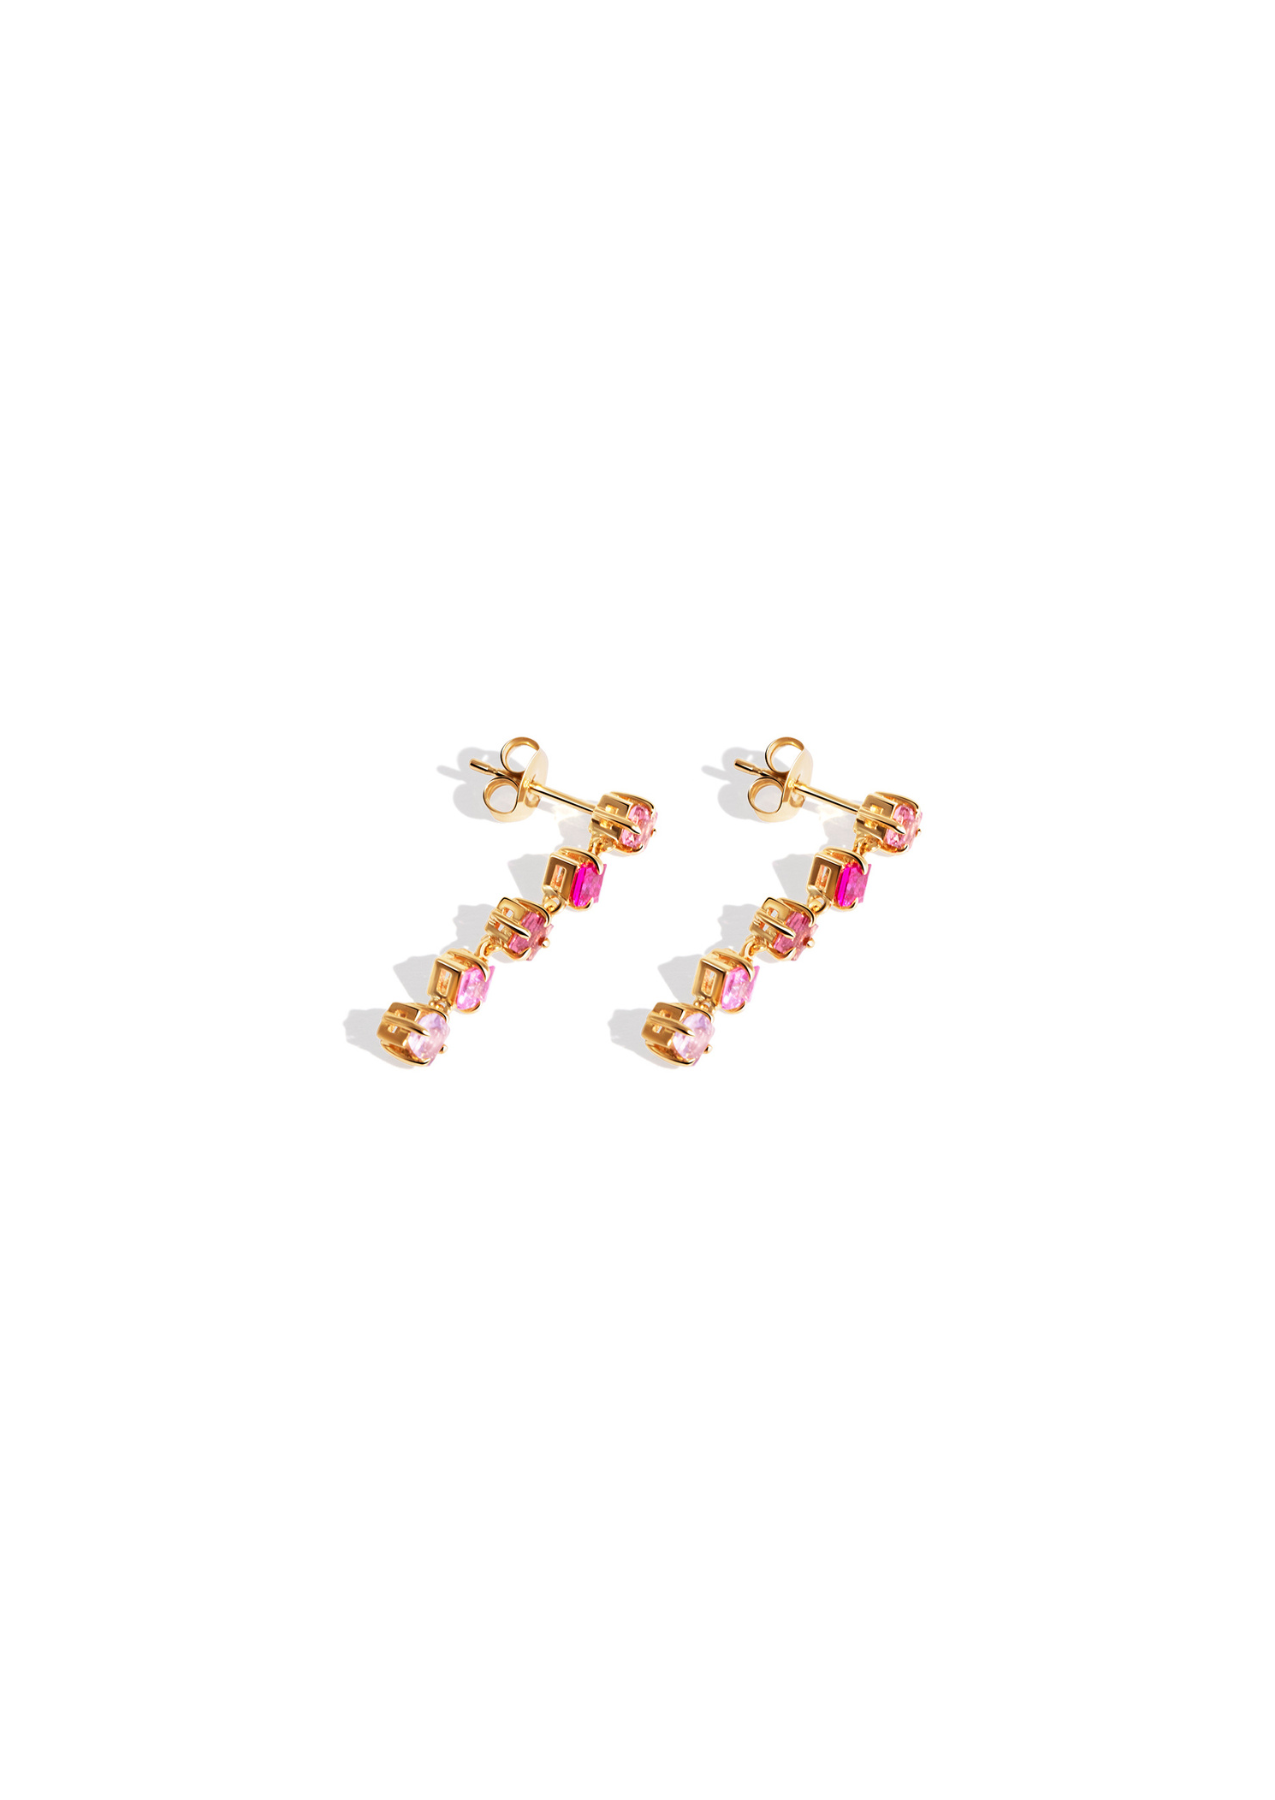 The Rosco Five 9ct Solid Gold Drop Earrings